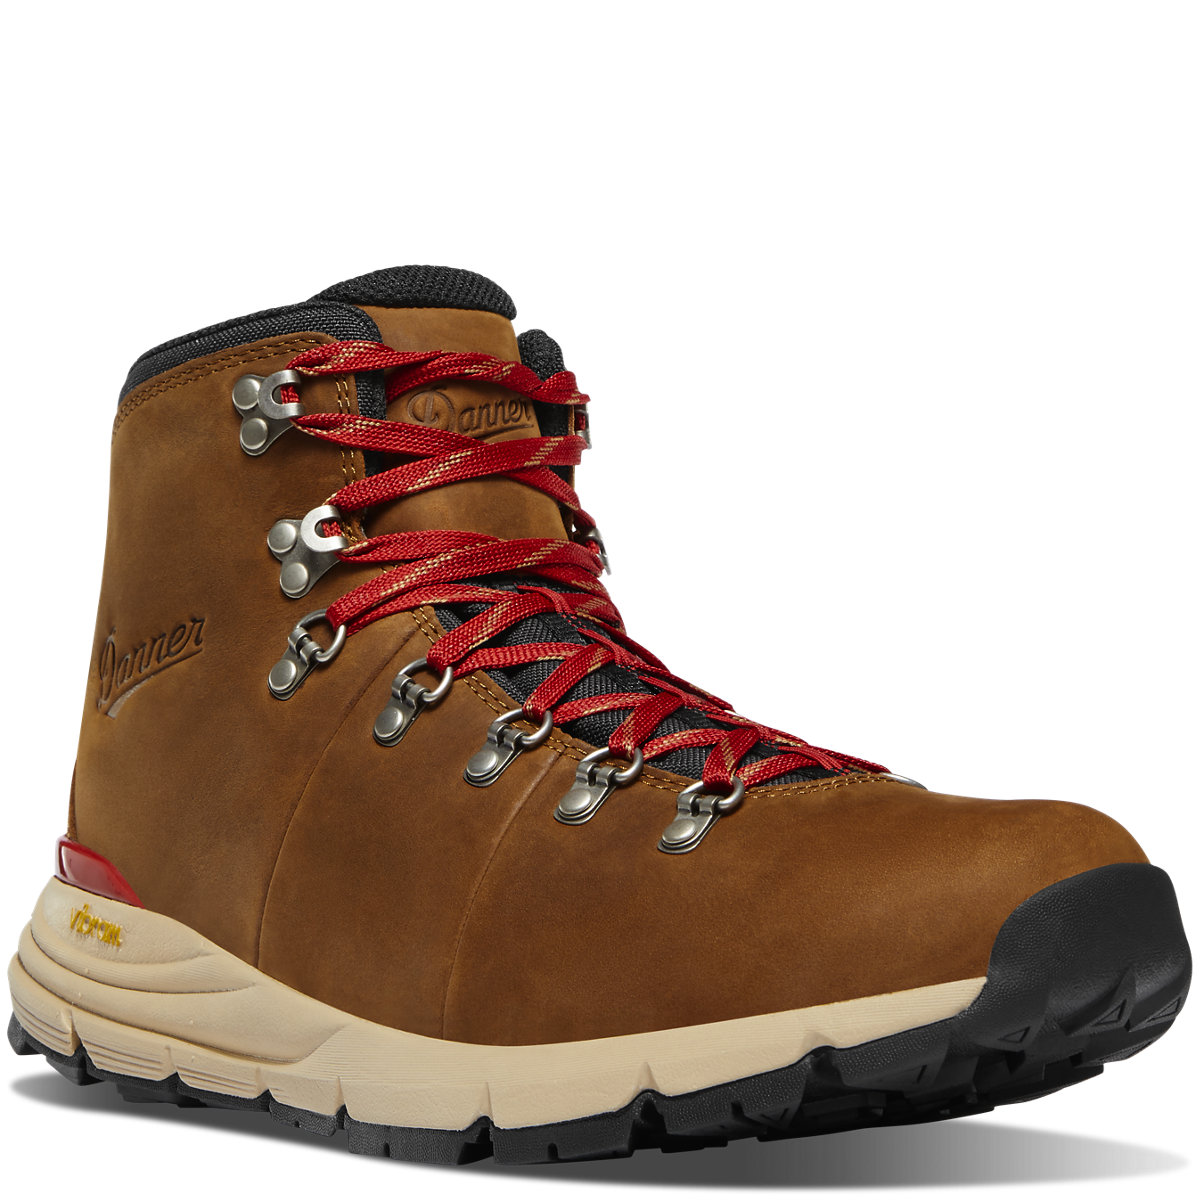 Mountain 600 Leaf 4.5" Grizzly Brown/Rhodo Red GTX